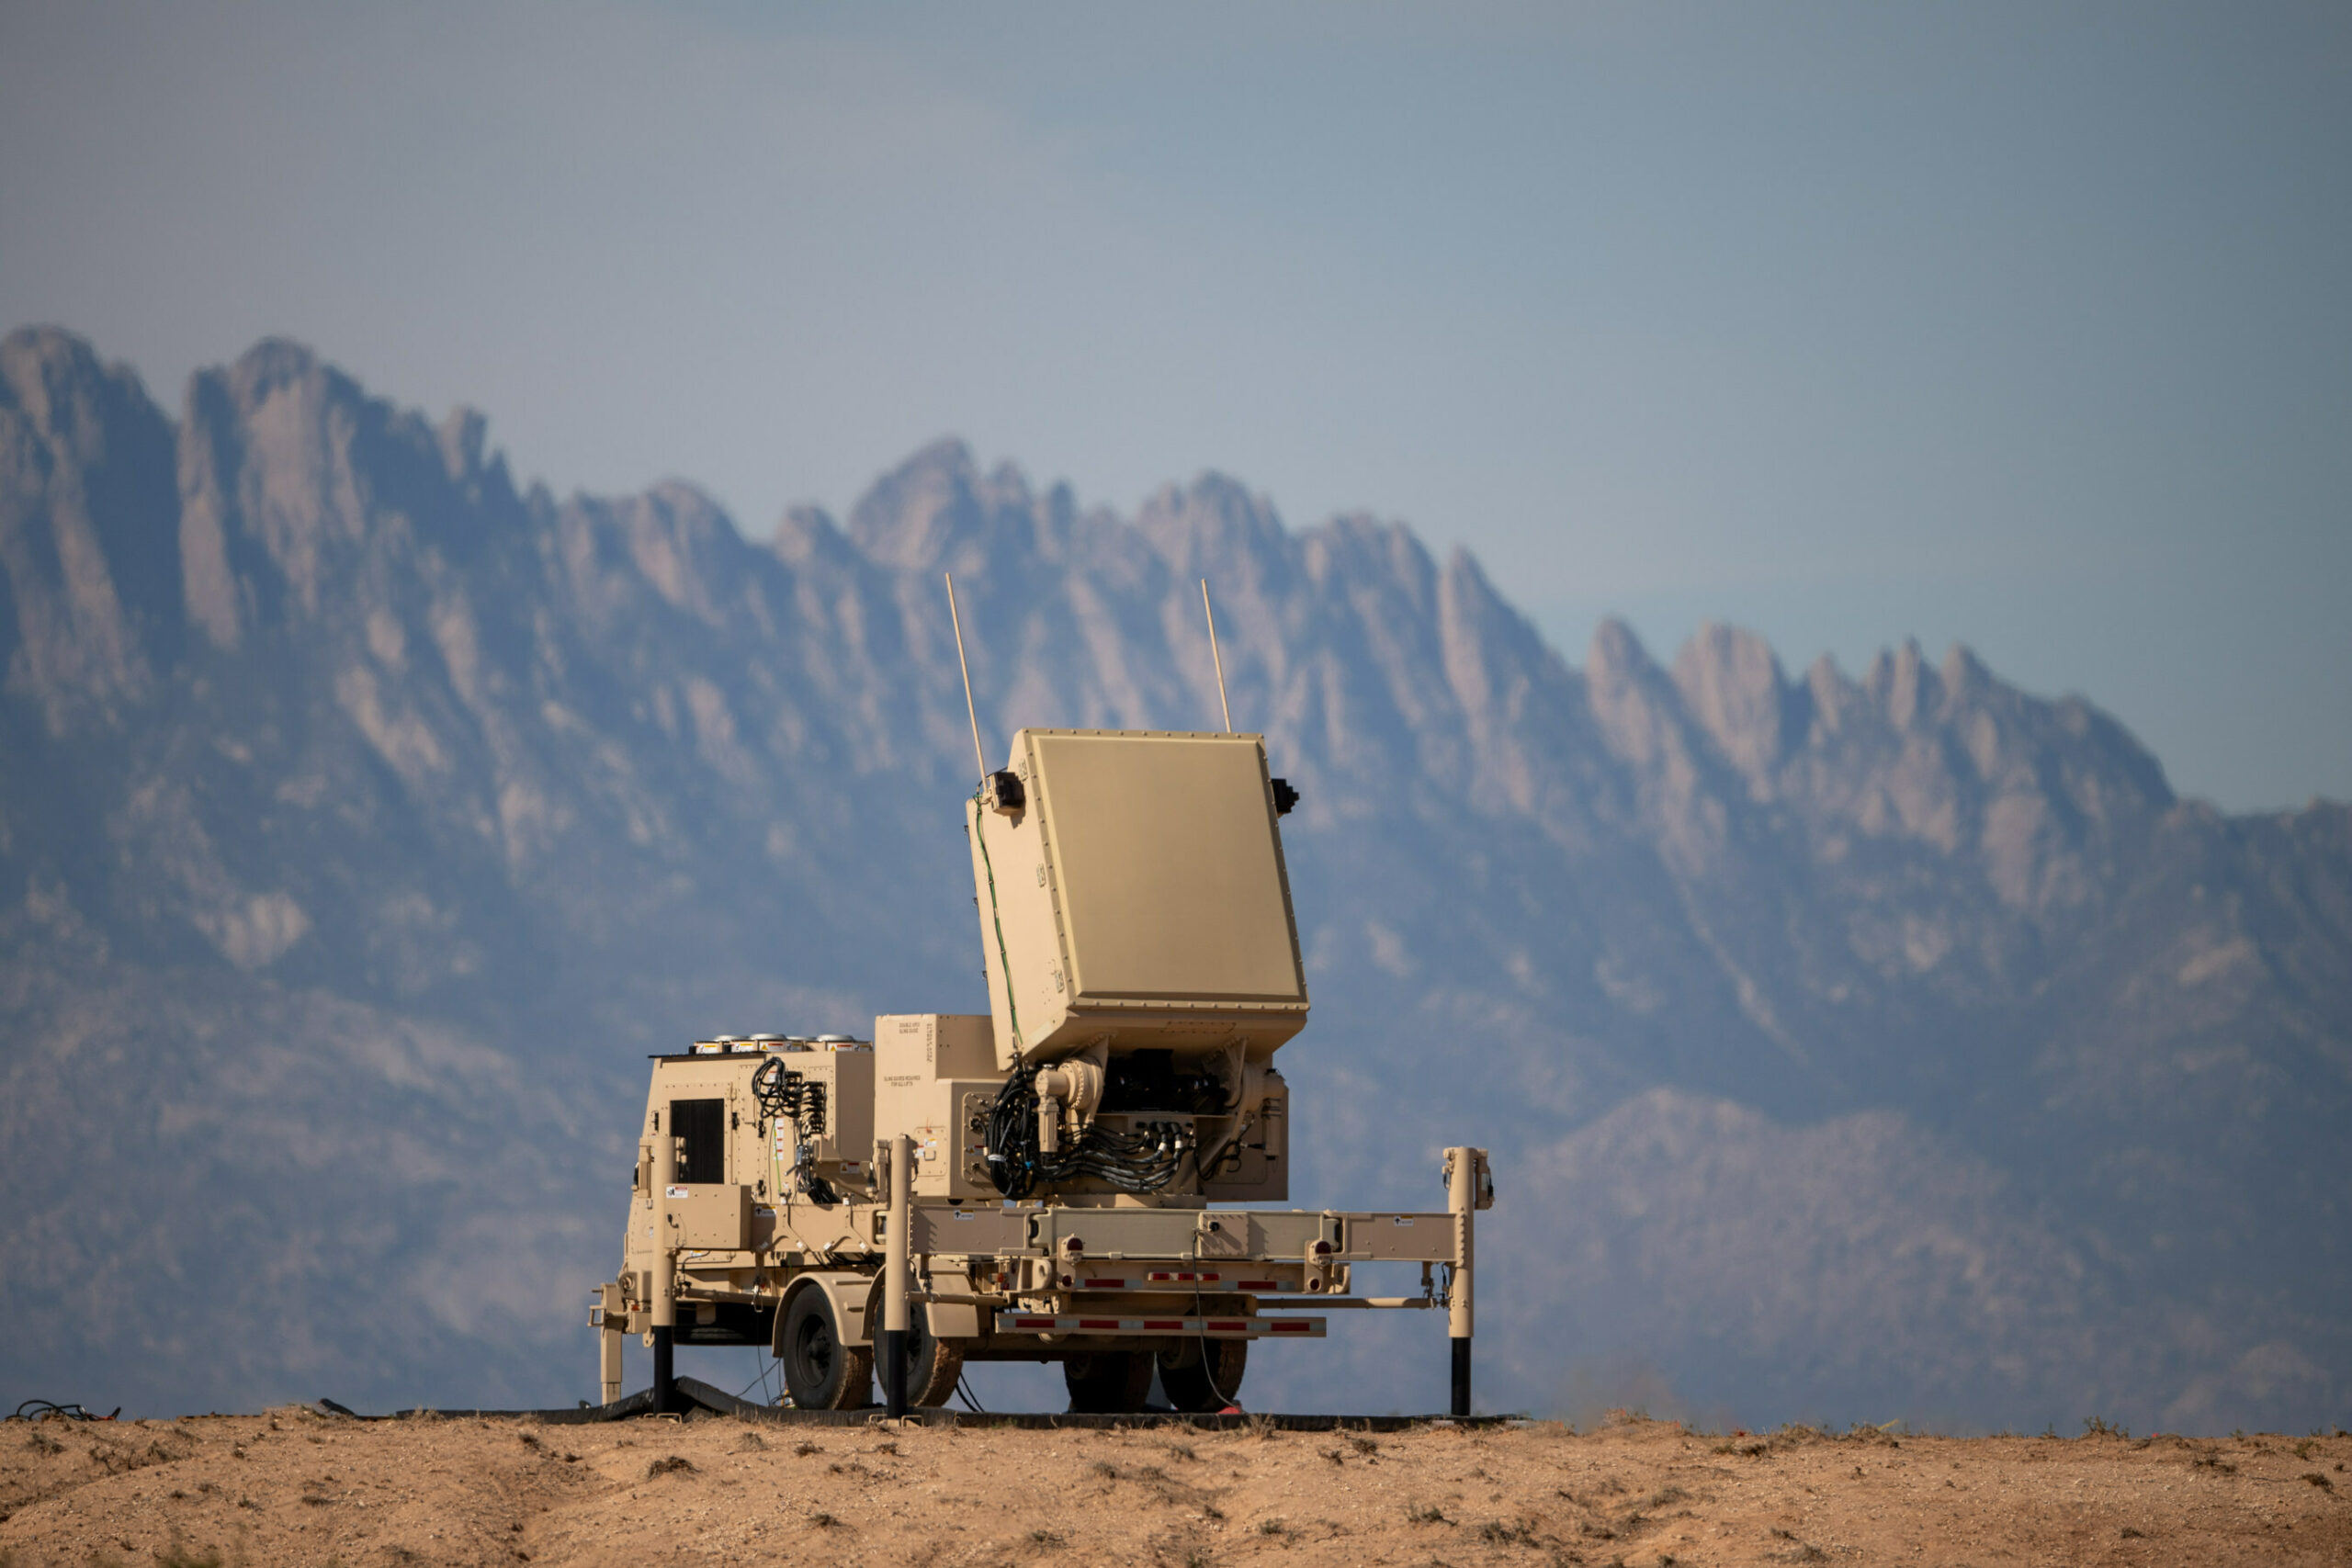 The GhostEye® MR, pictured here during an extended exercise at White Sands Missile Range, is an advanced medium-range sensor for the National Advanced Surface to Air Missile System (NASAMS).